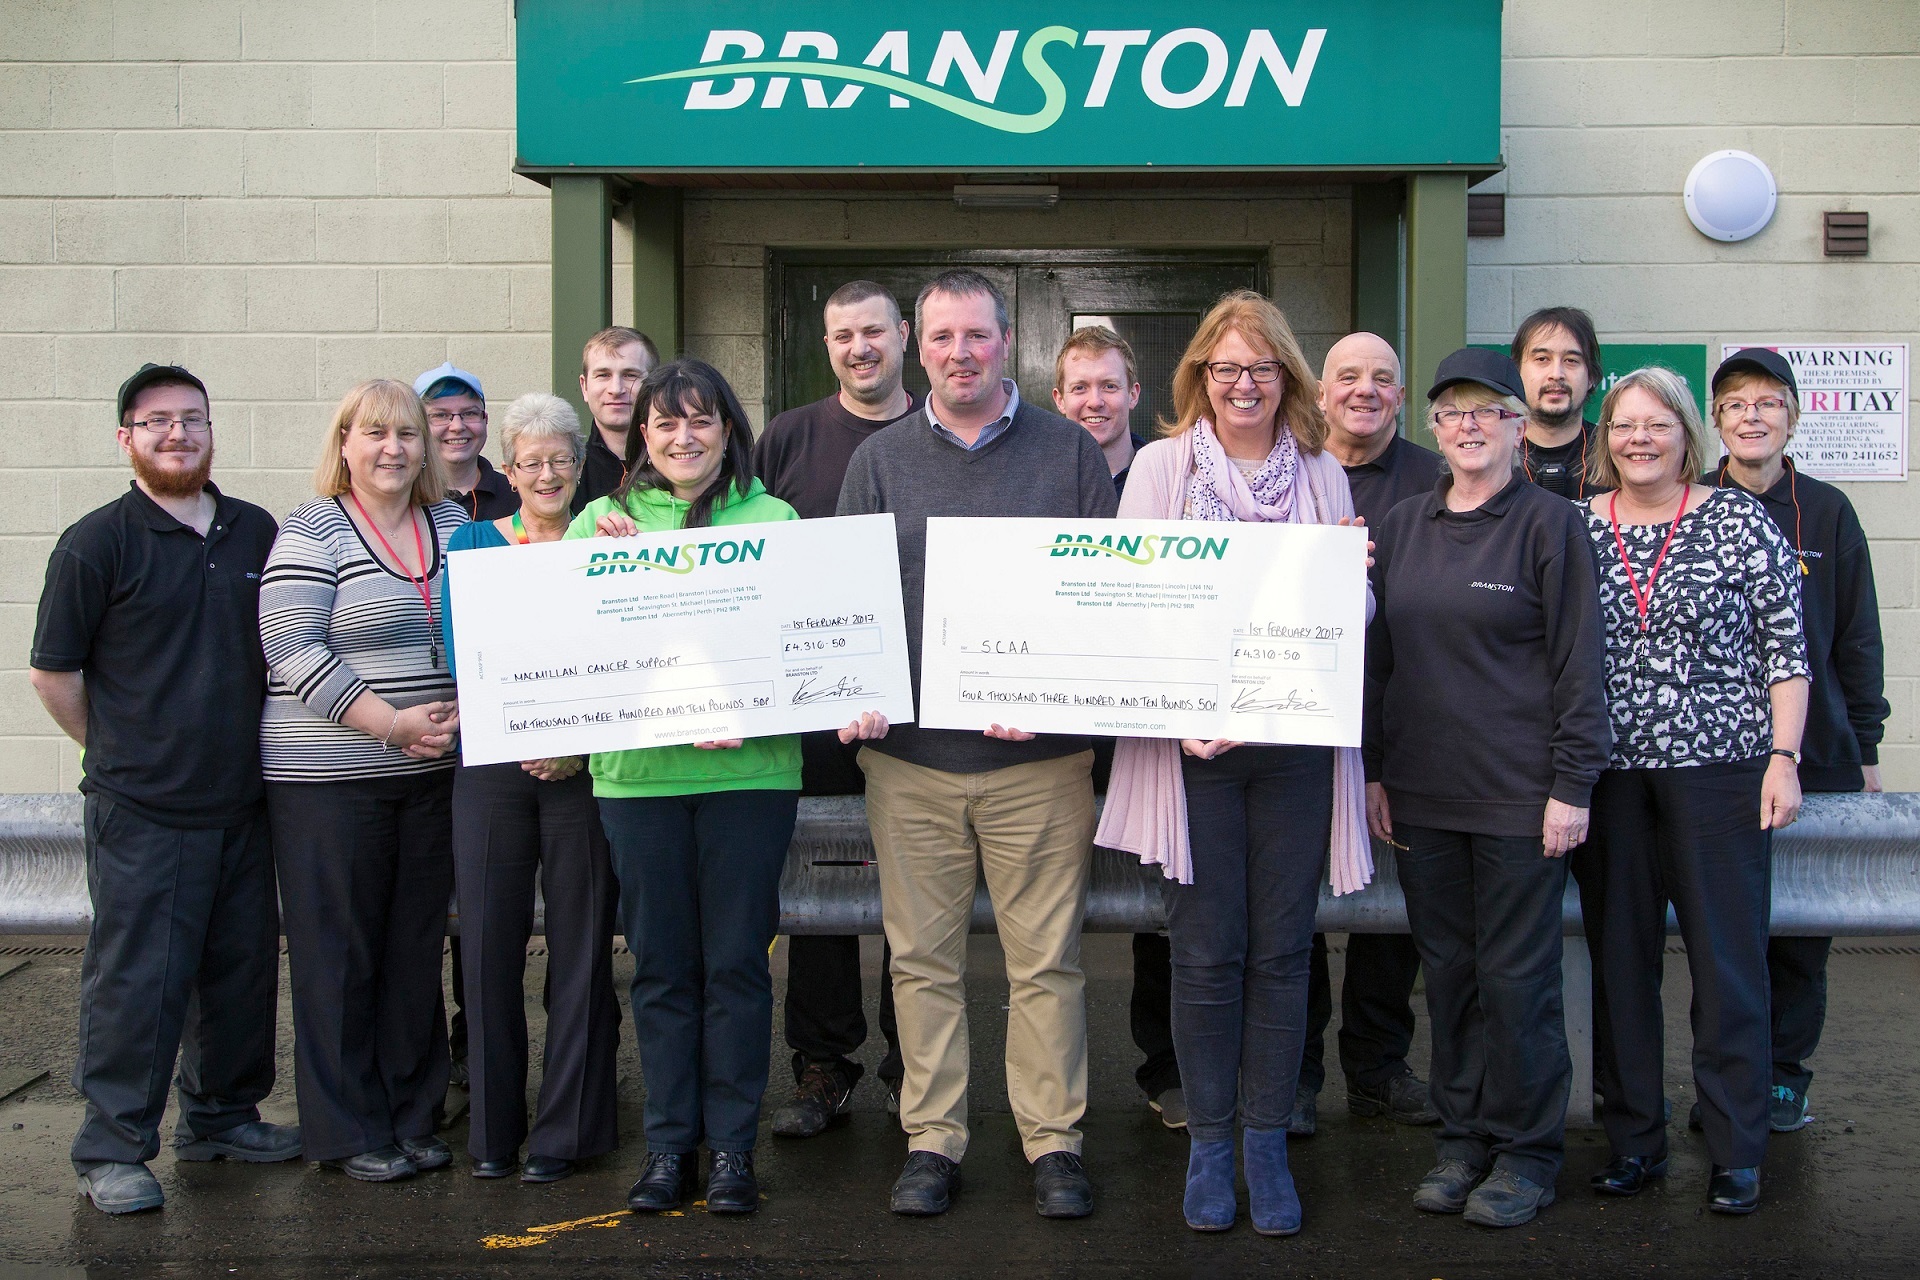 General Manager, Kevin Imrie presenting cheques to Isla Dewar from Macmillan Cancer Support and Fiona Dennis from SCAA.